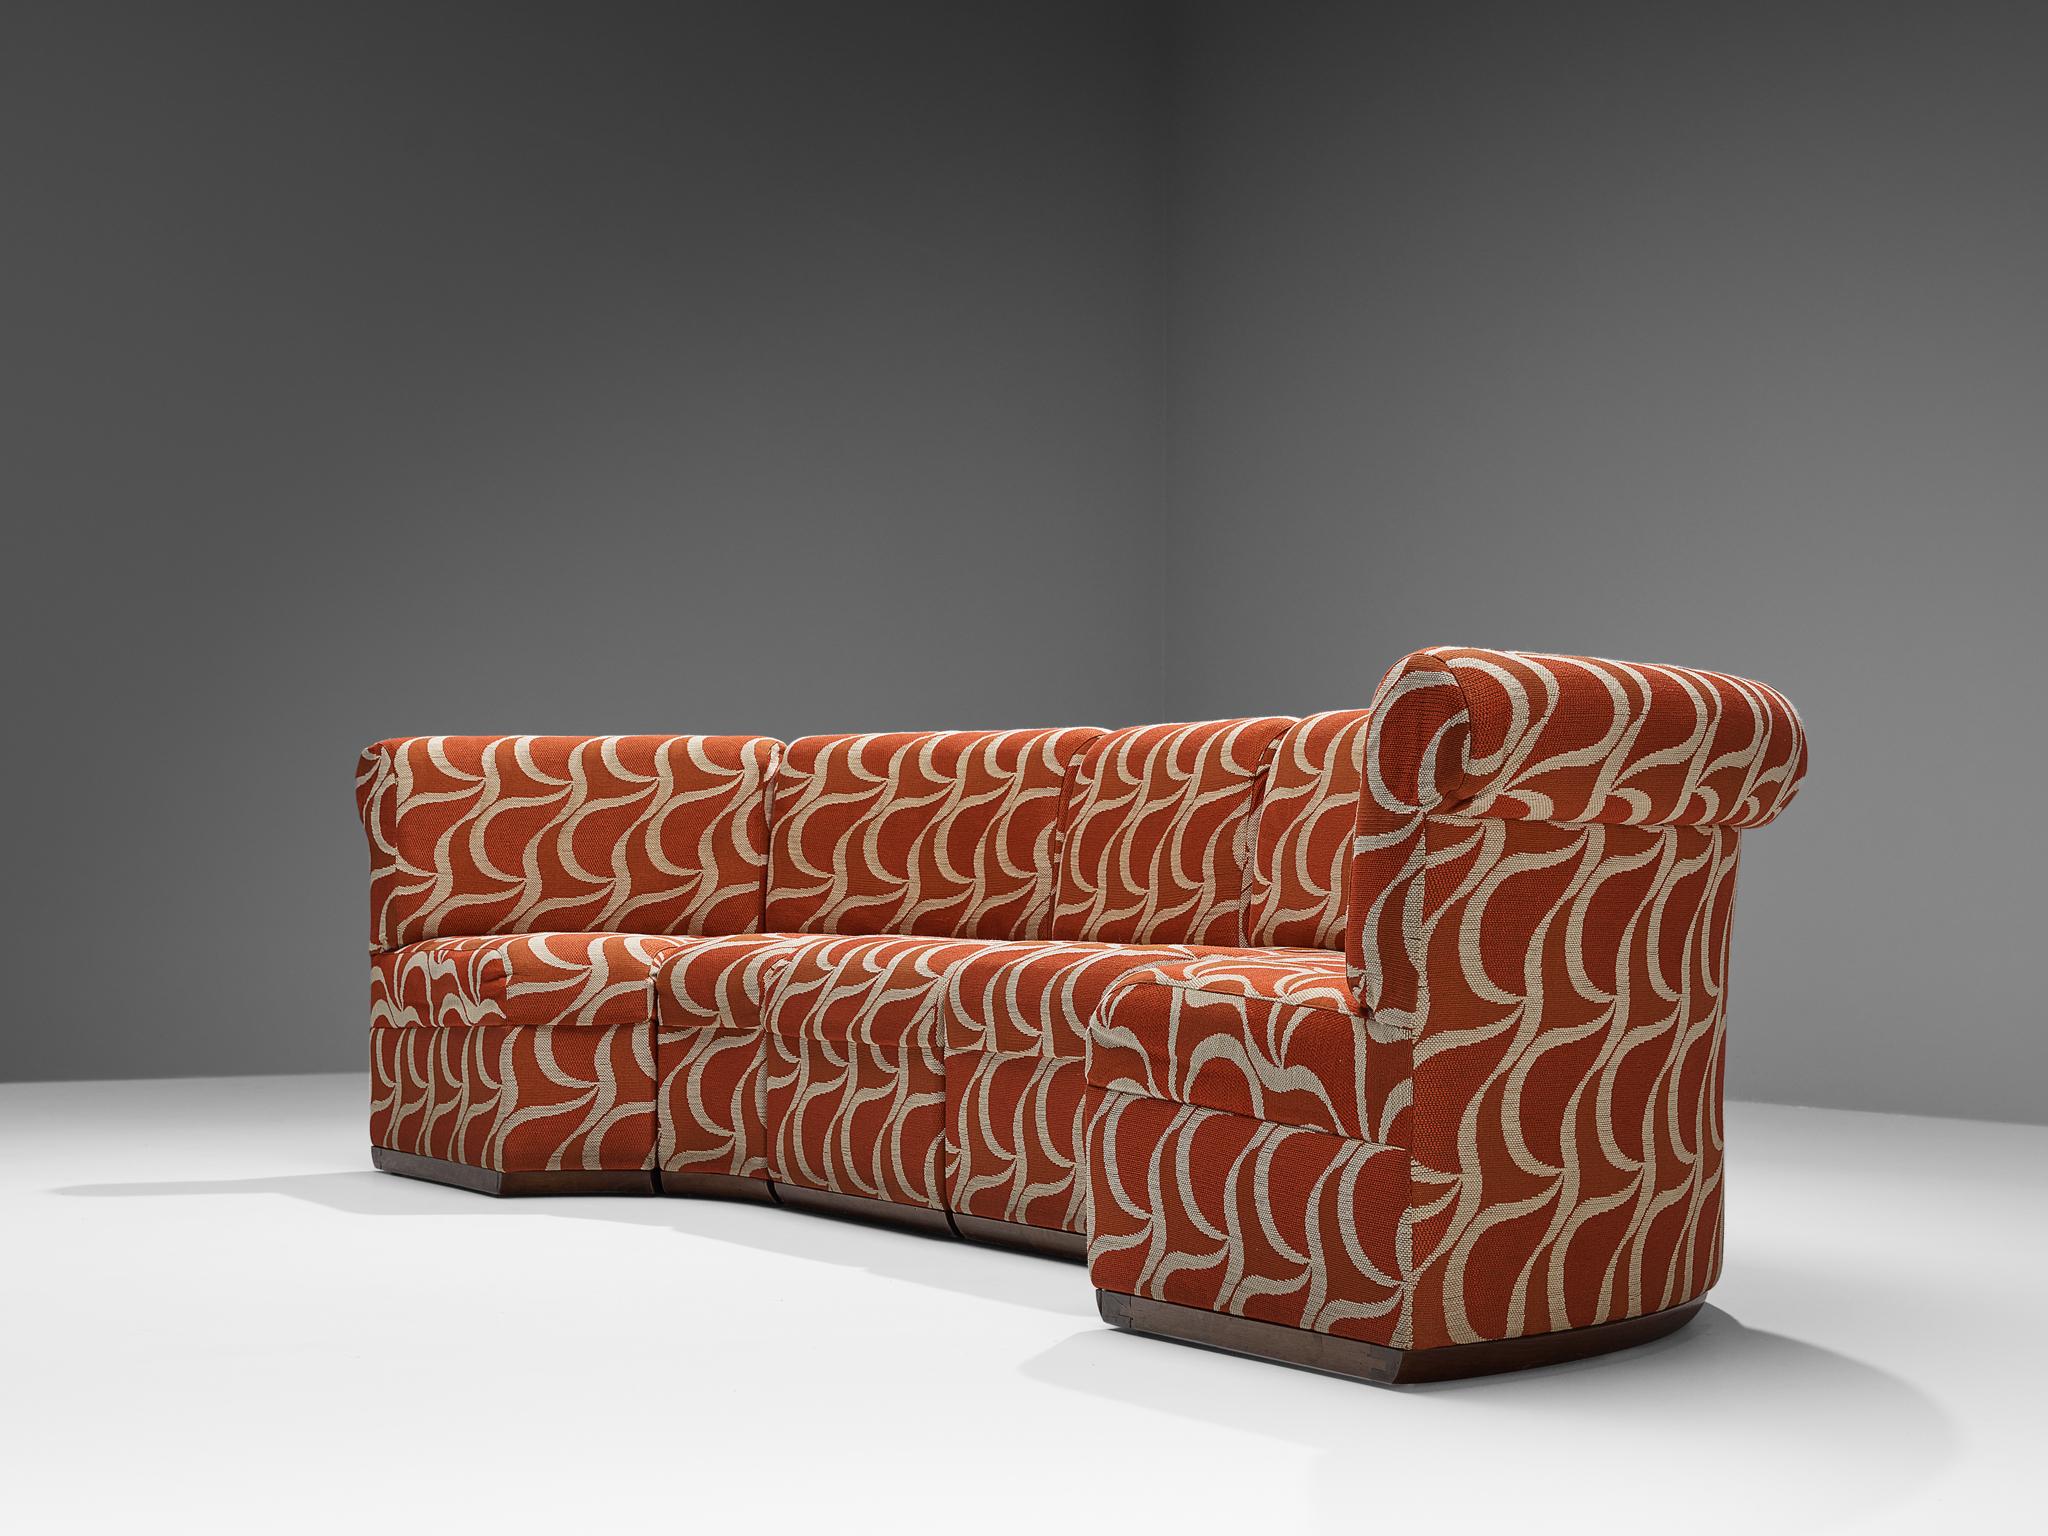 Post-Modern Italian Sectional Sofa in Red Orange Patterned Upholstery